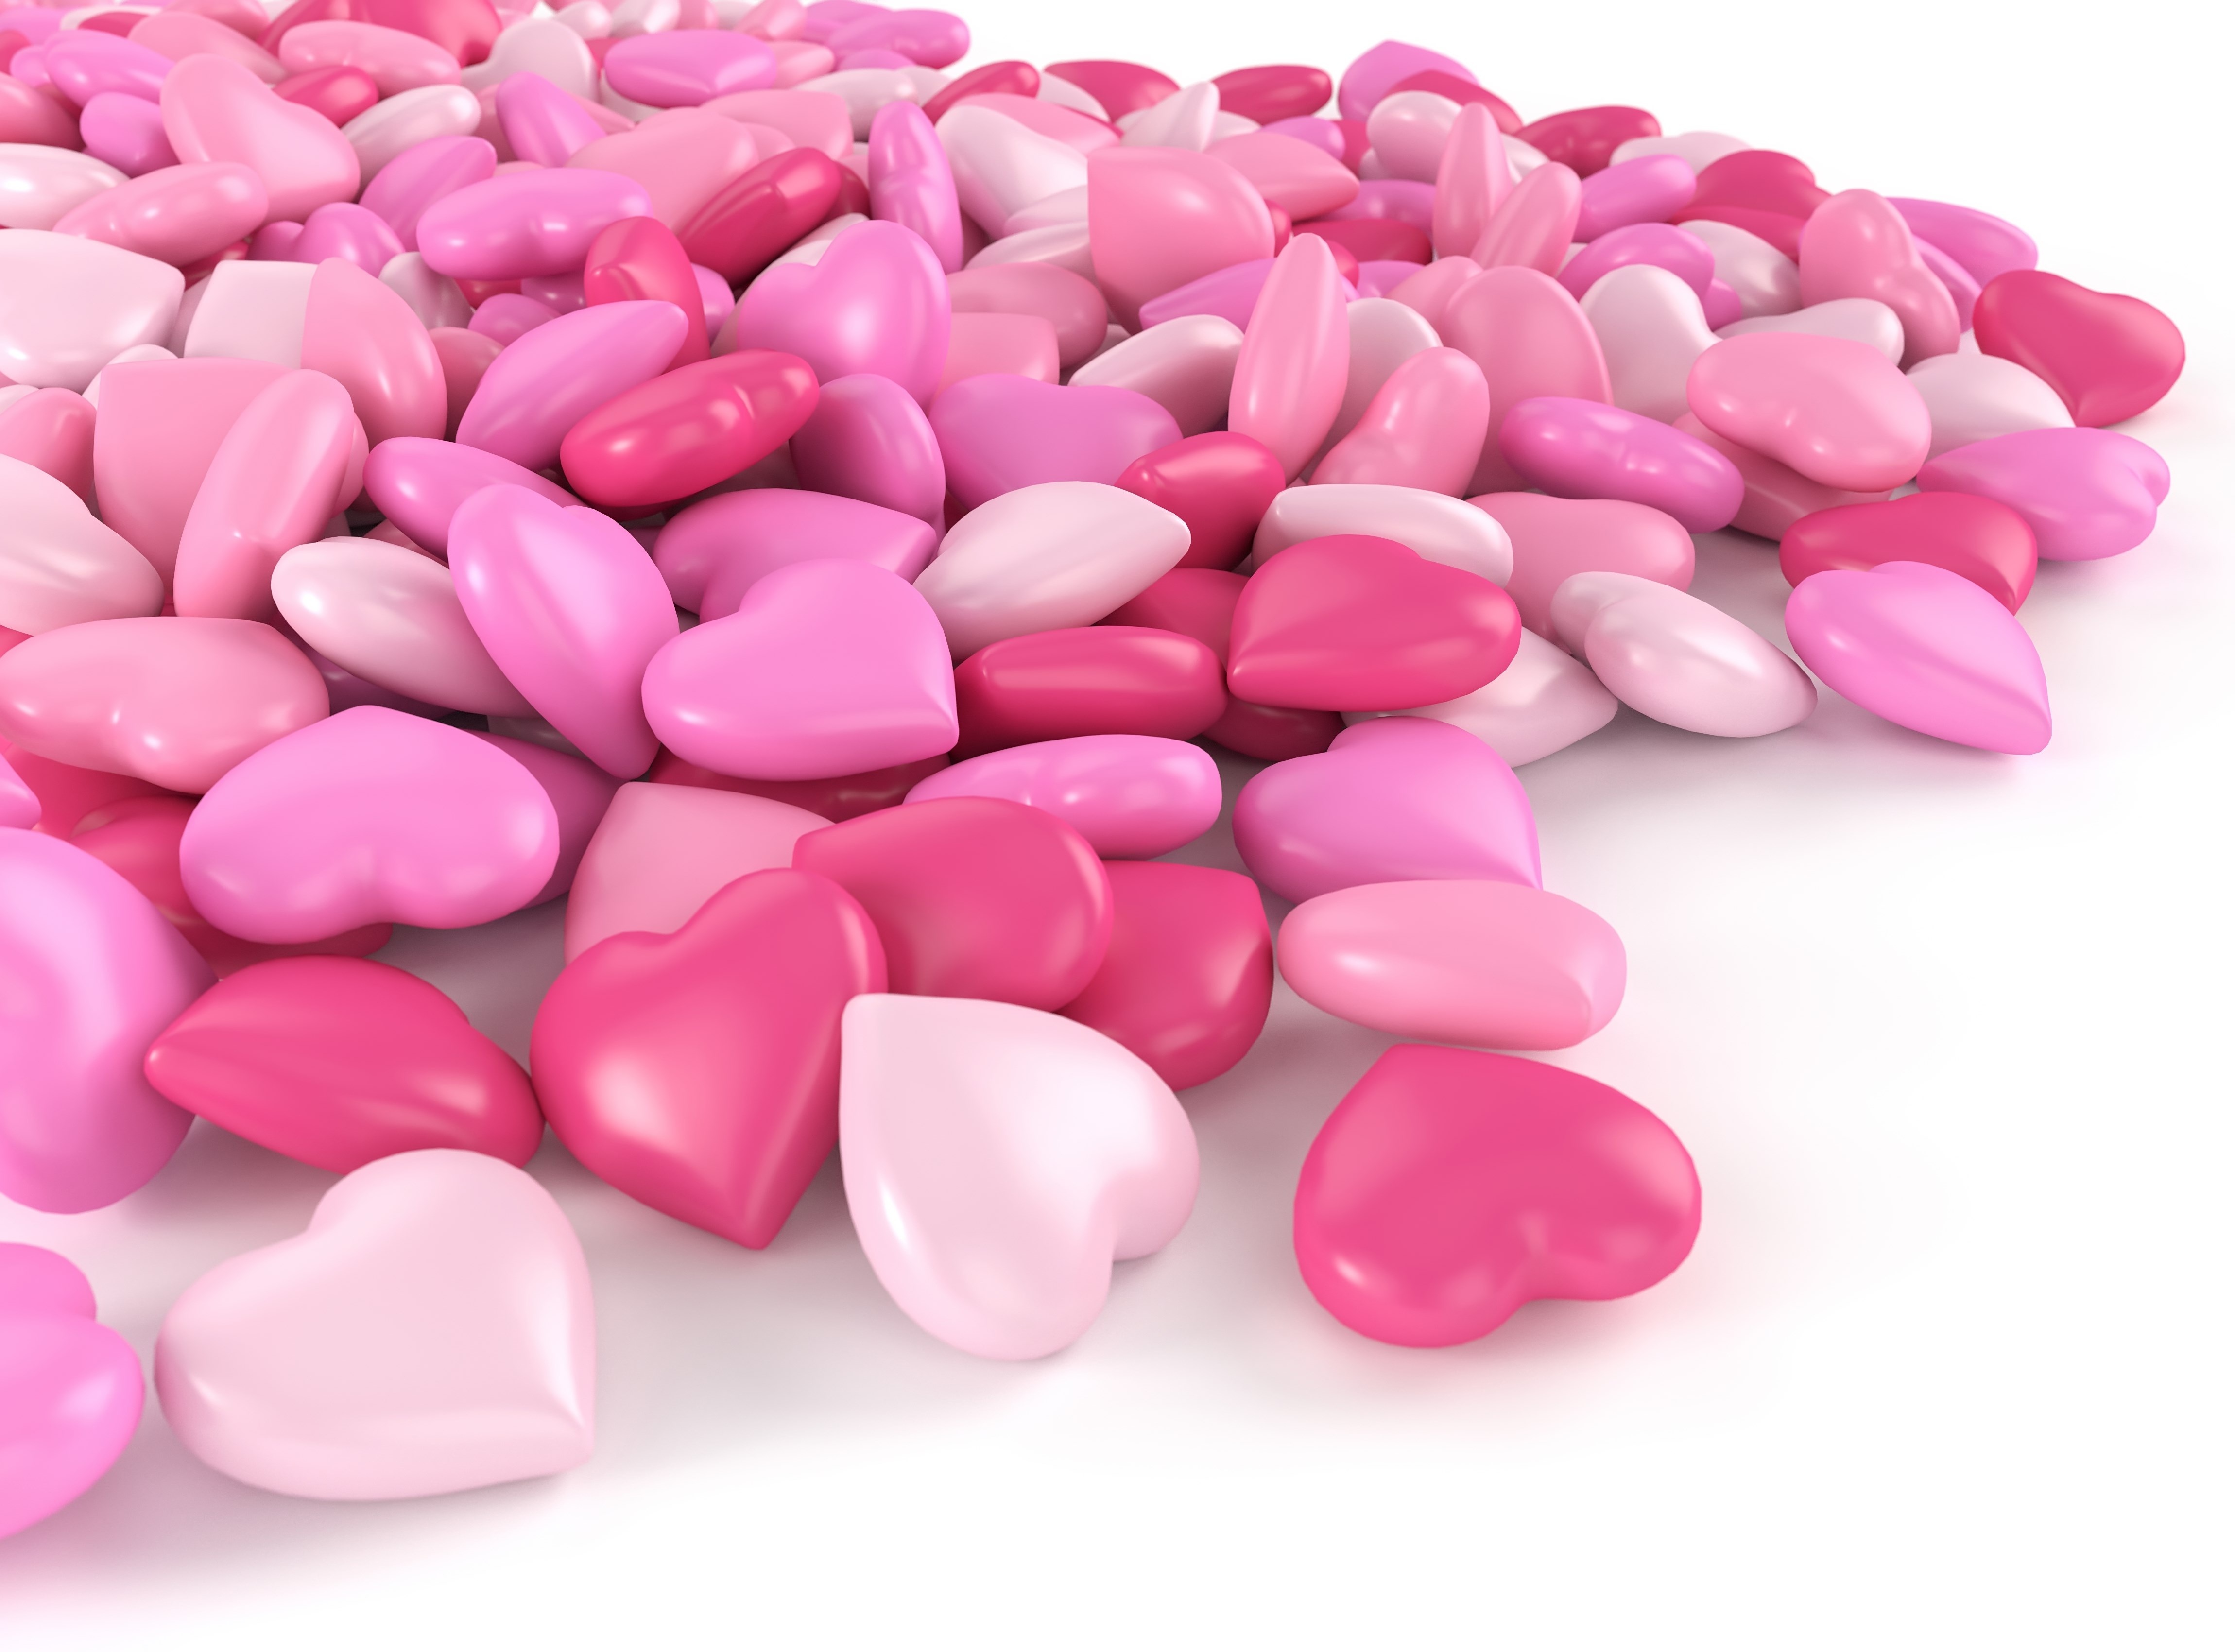 64712 free wallpaper 240x320 for phone, download images heart, 3d, form, pink 240x320 for mobile